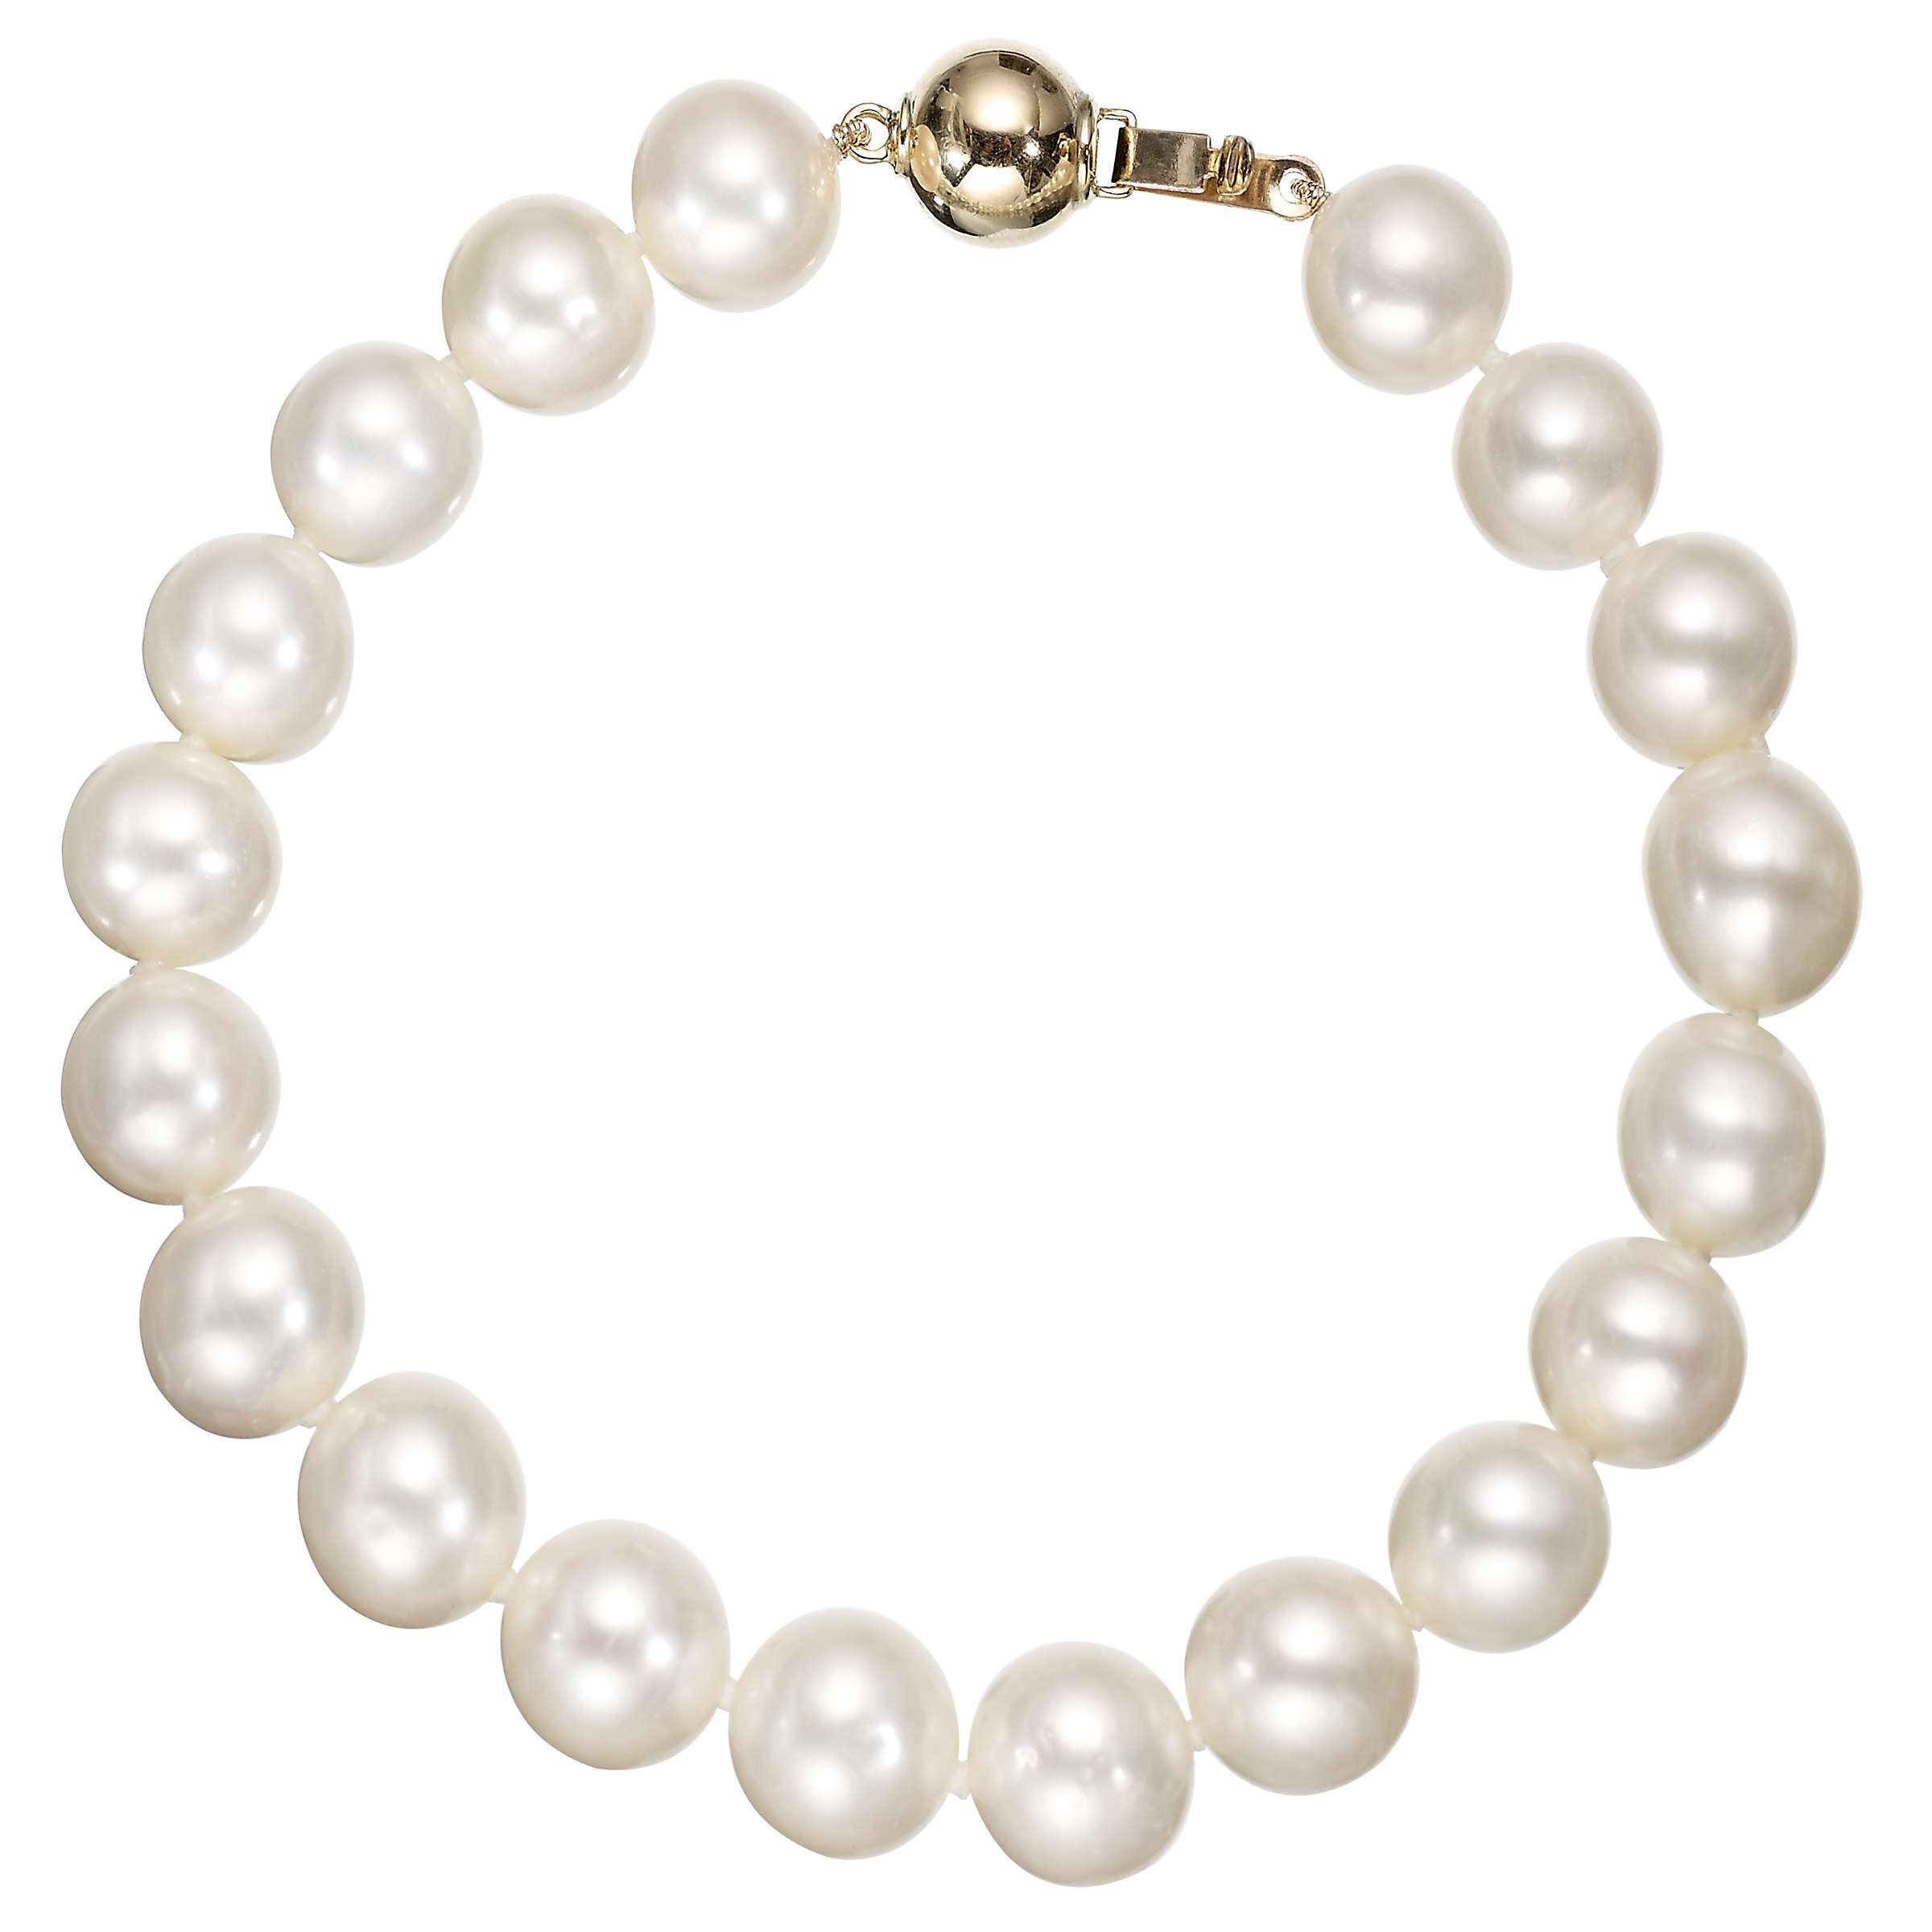 Buy A B Davis Freshwater Lustre Pearl Knotted 7.5" Bracelet with Gold Clasp Online at johnlewis.com